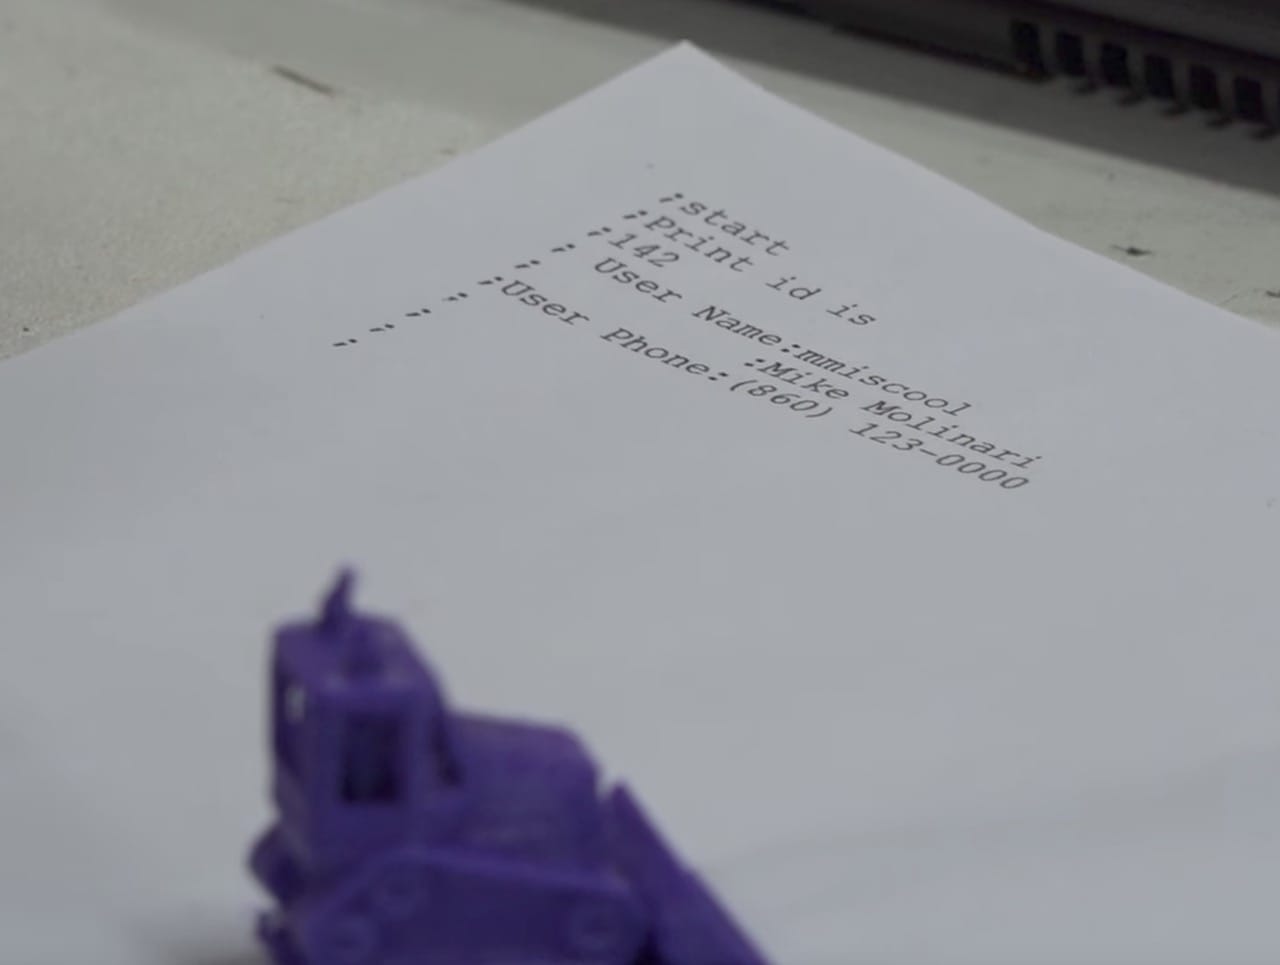  An object 3D printed on a labelled piece of paper 